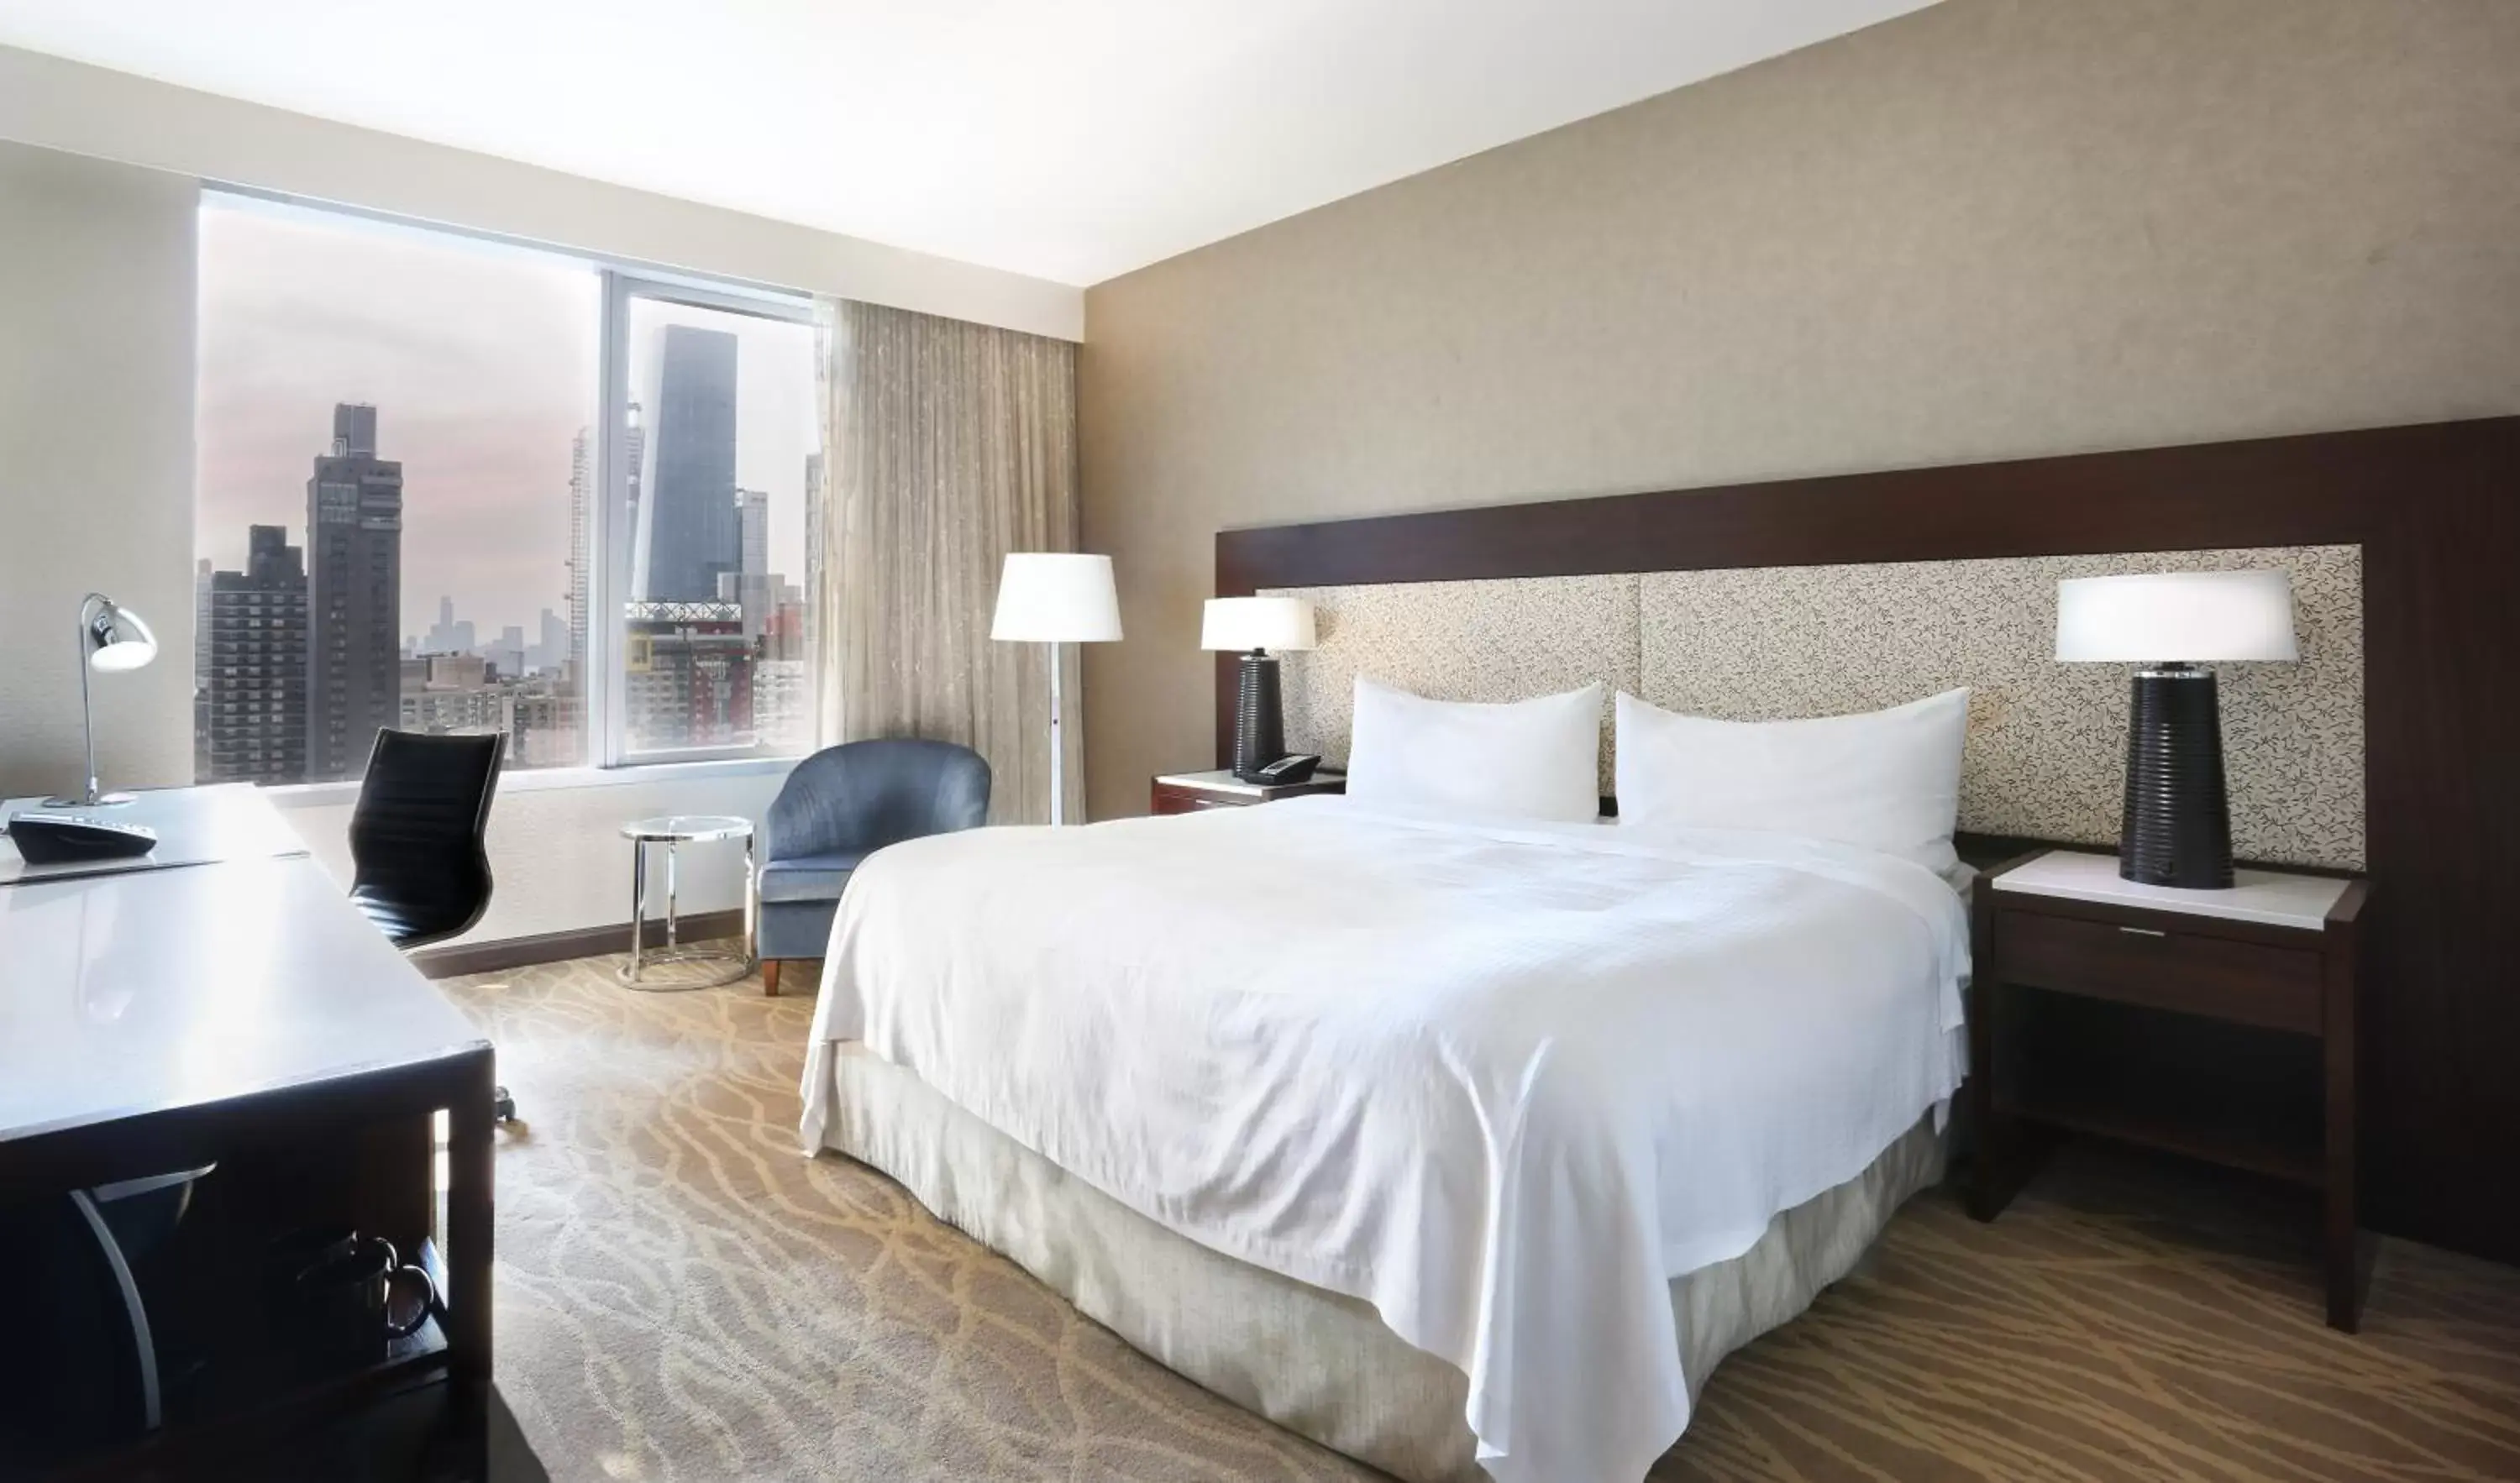 Premium King Room with Skyline View in InterContinental New York Times Square, an IHG Hotel